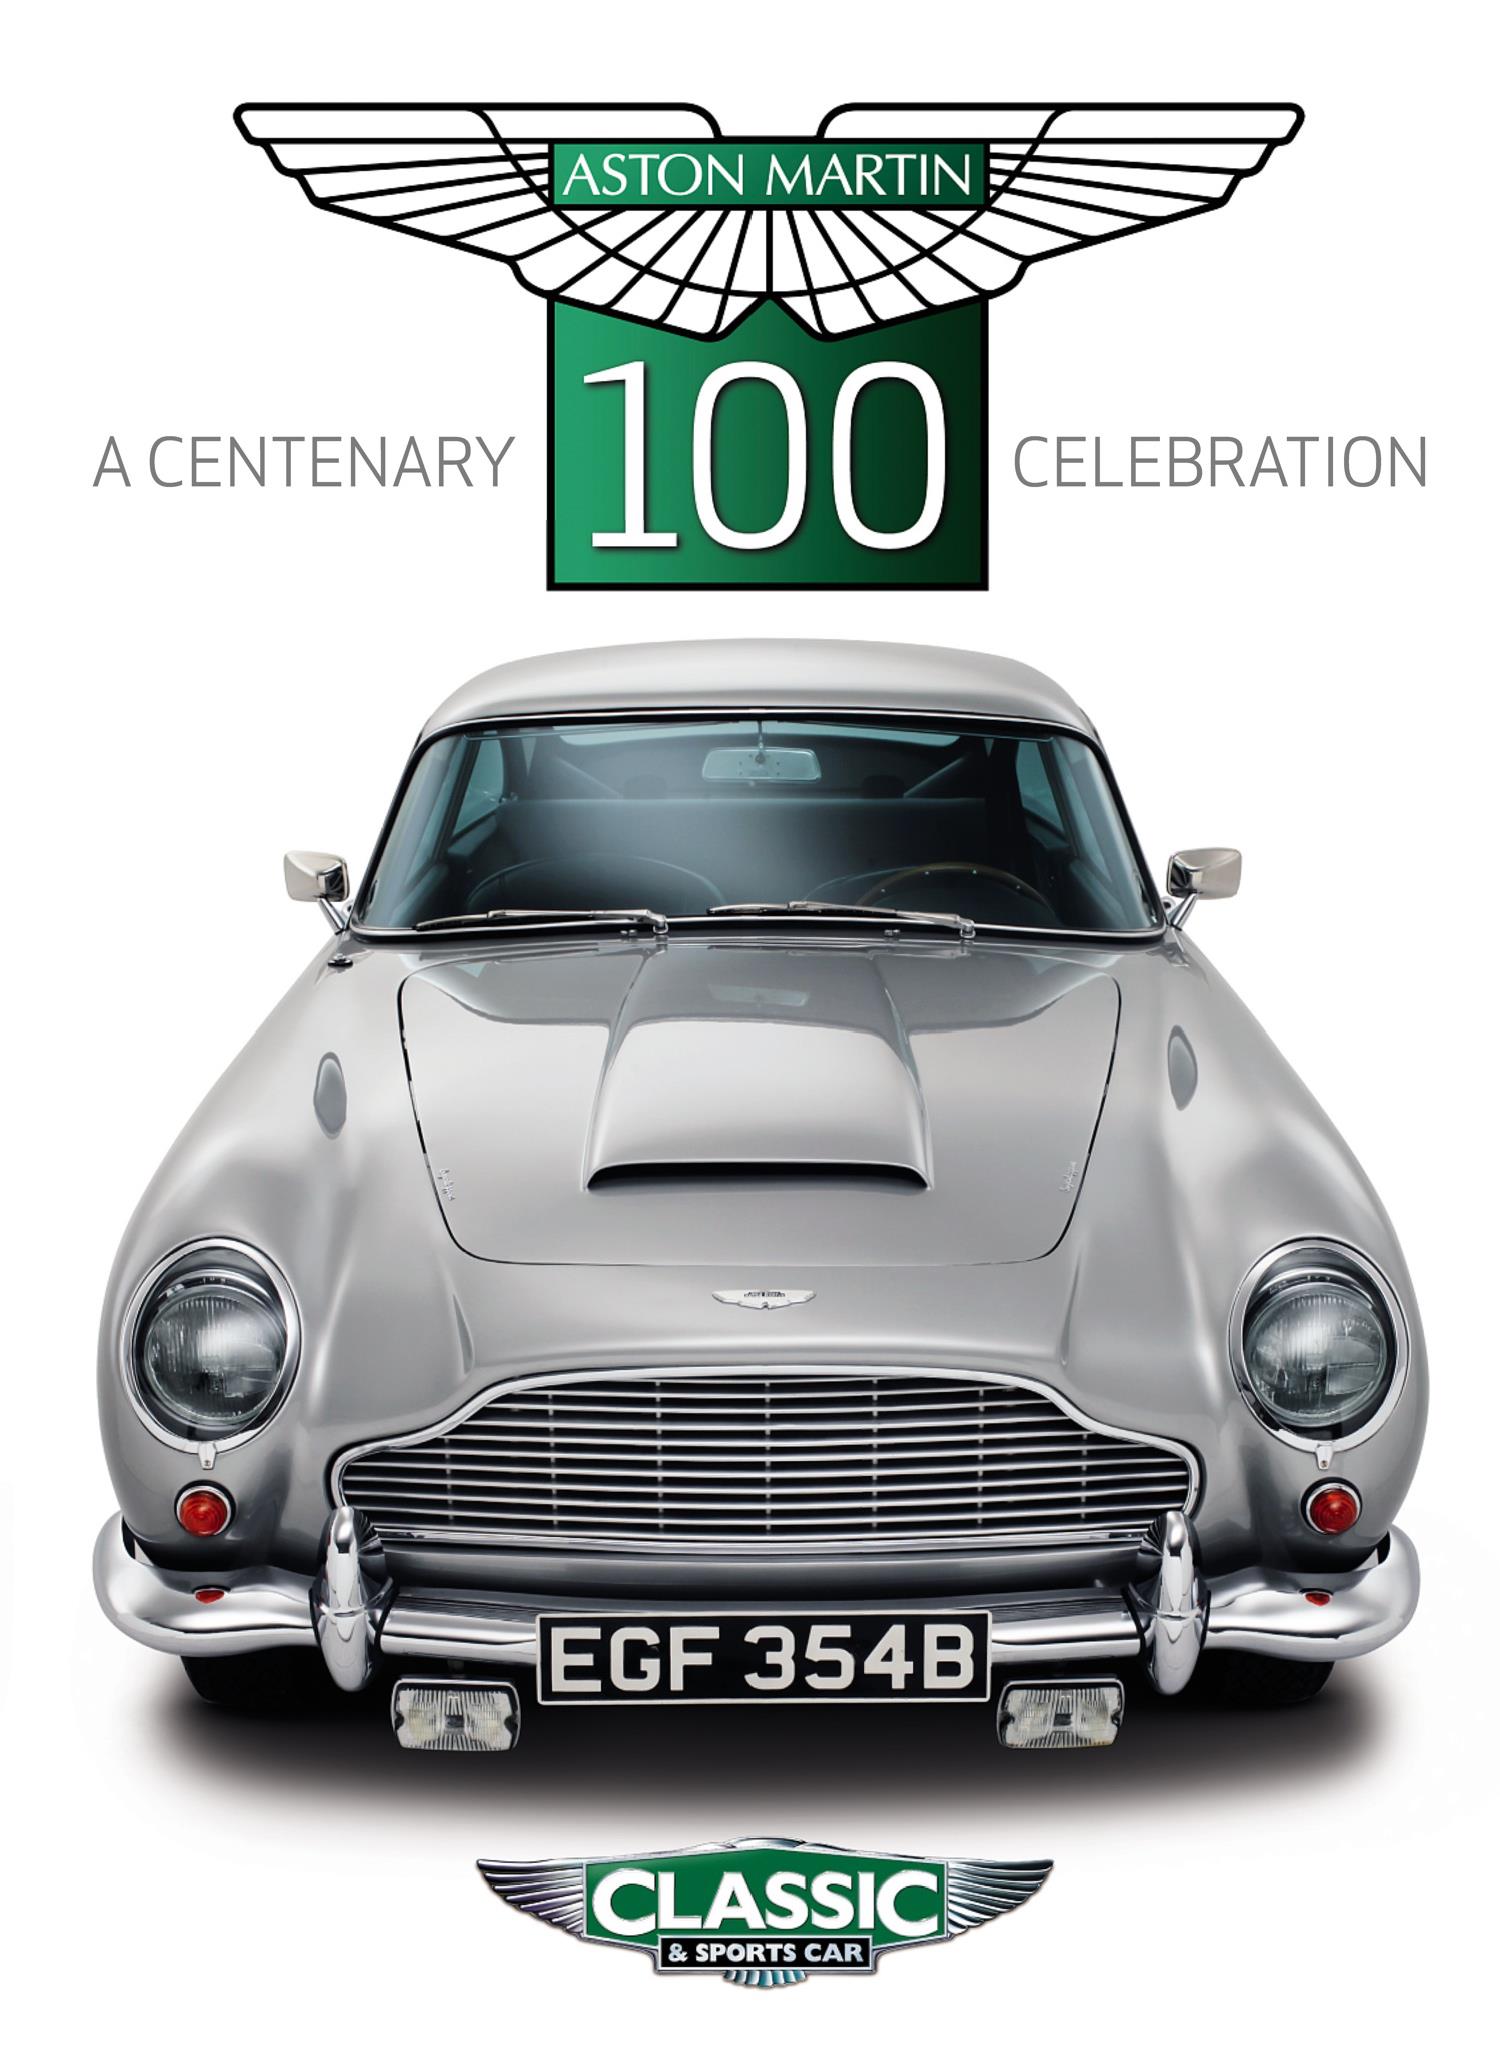 Журнал Aston Martin Centenary Celebration 2013(from the publishers of Classic Sports cars)